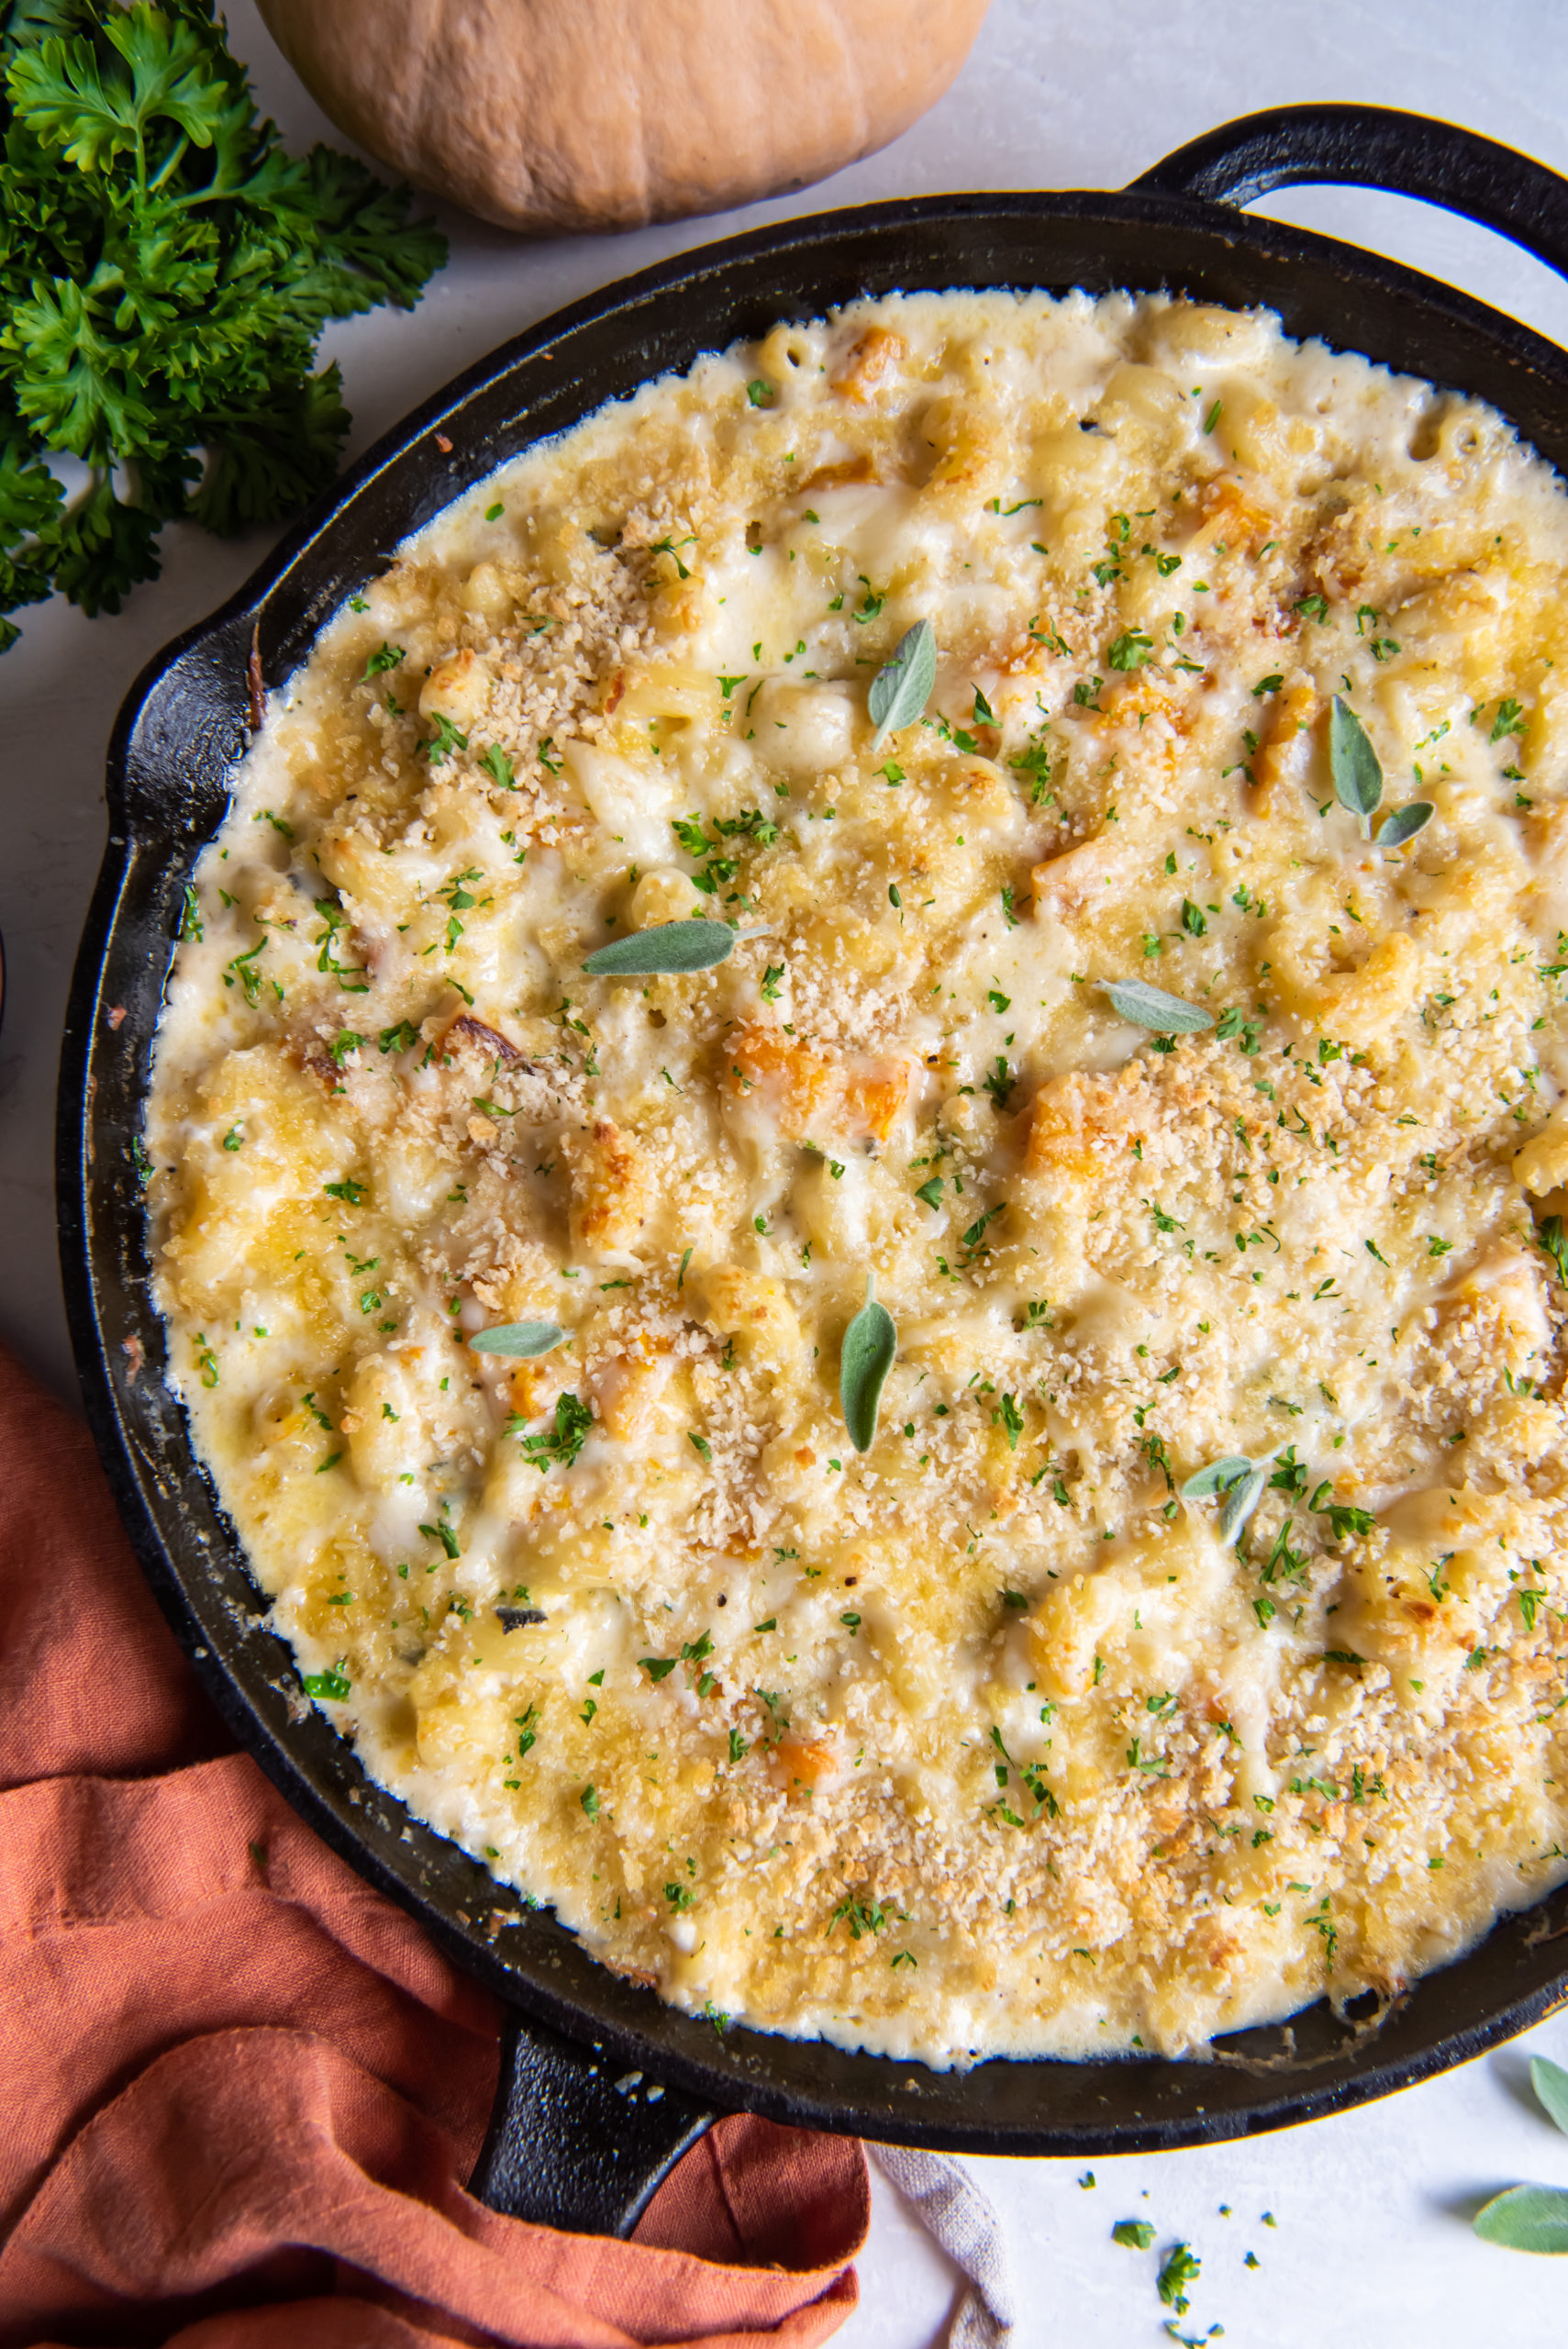 Overhead view of a skillet of mac and cheese made with butternut squash